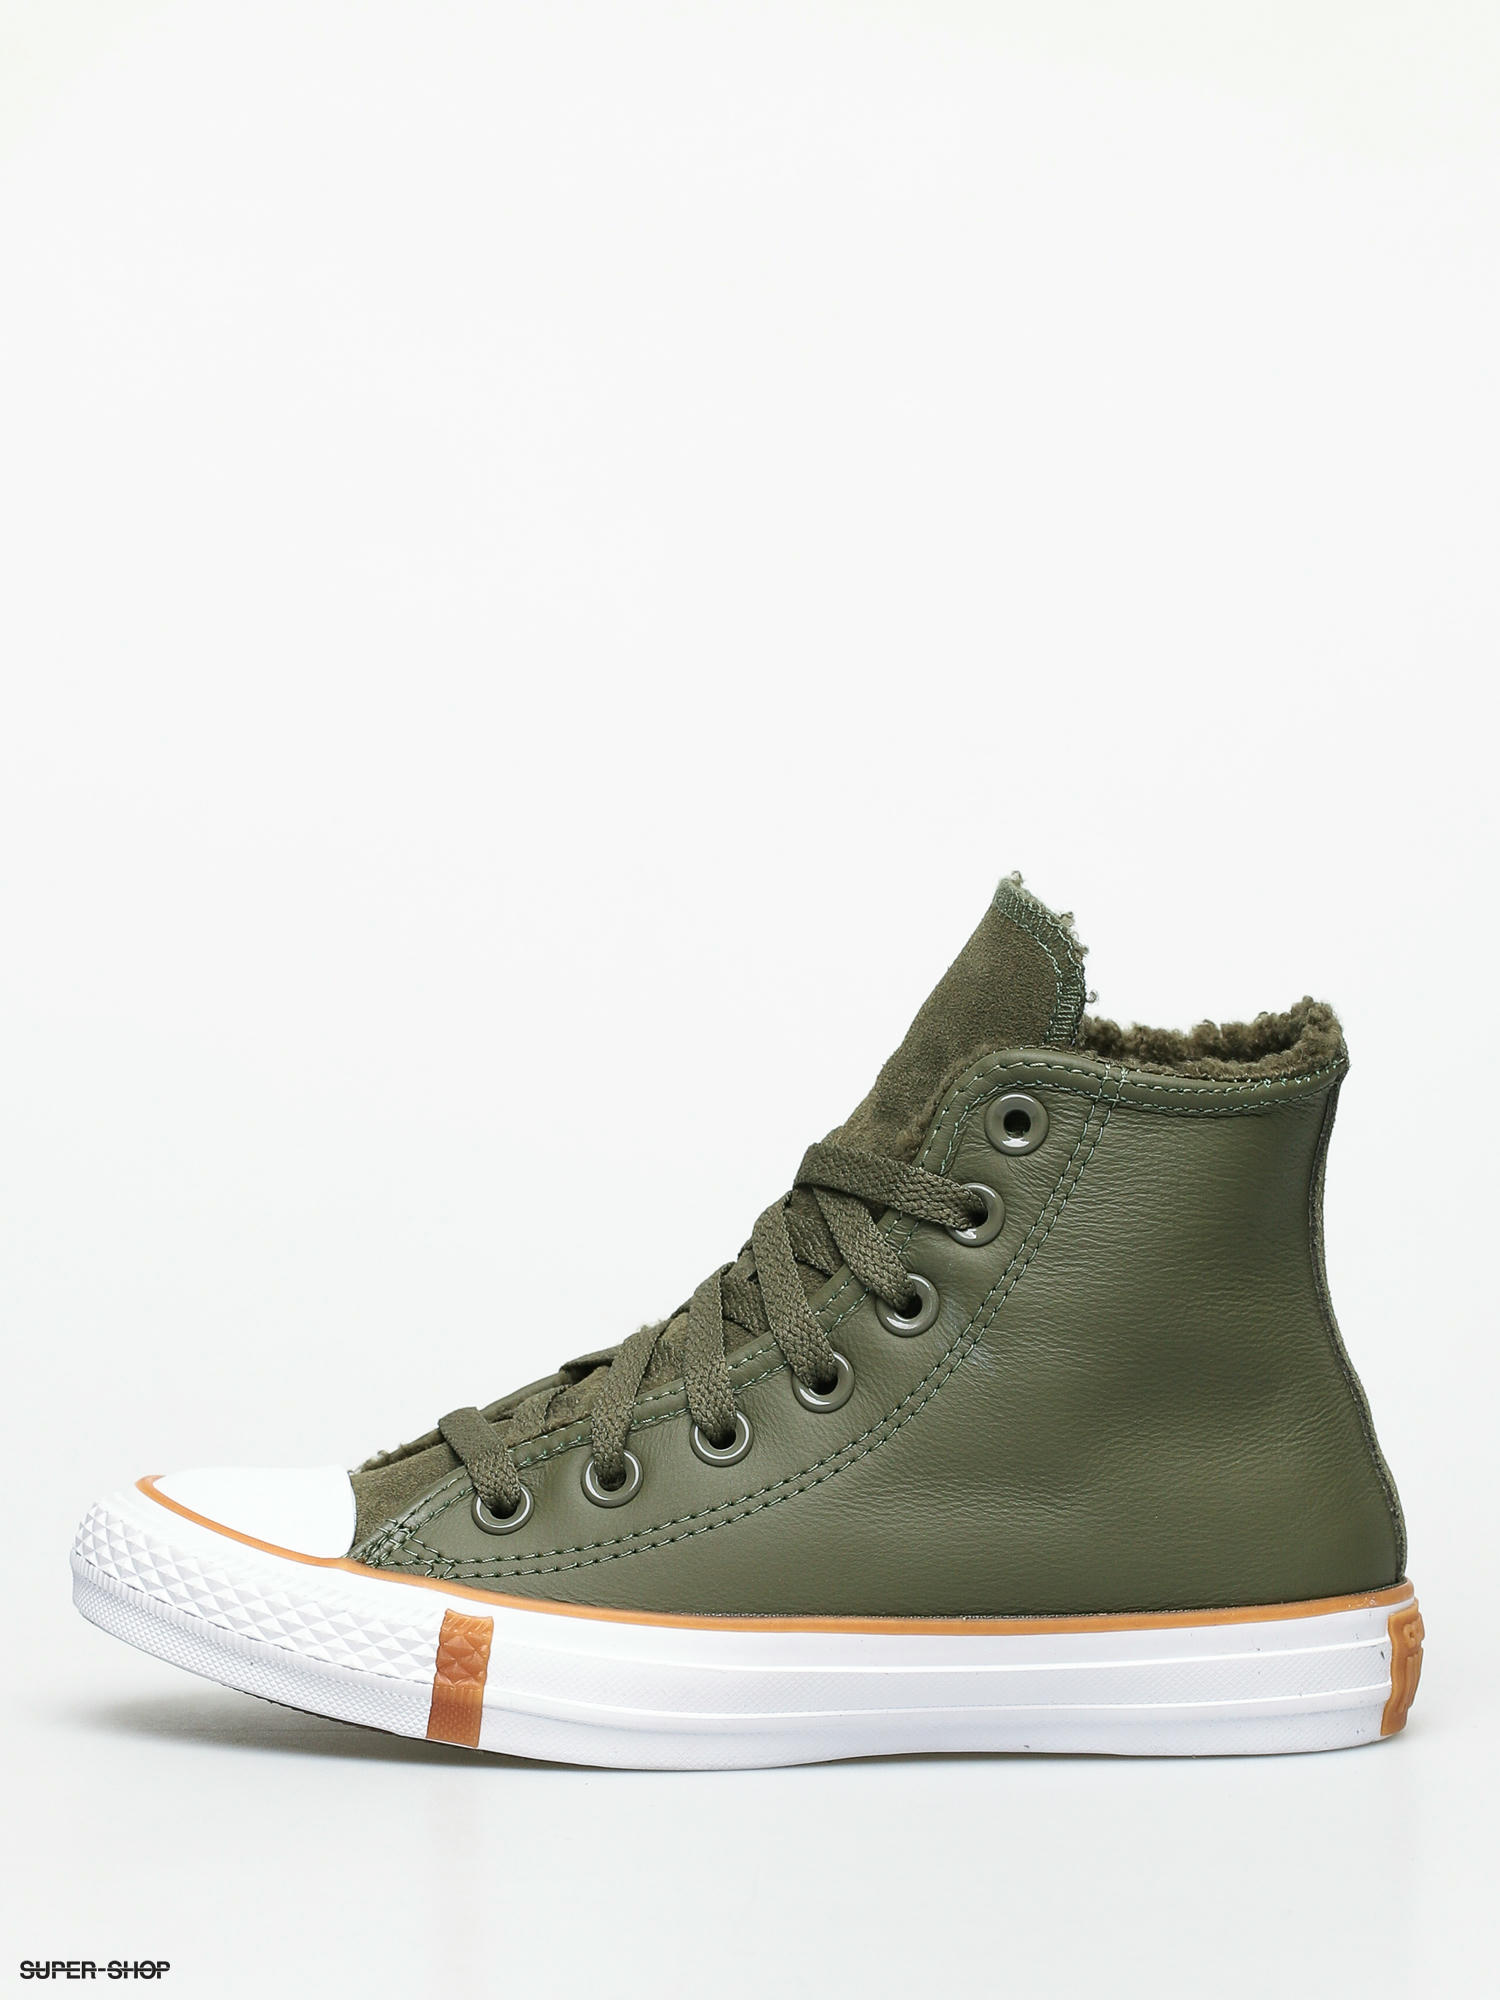 converse all star high tops leather